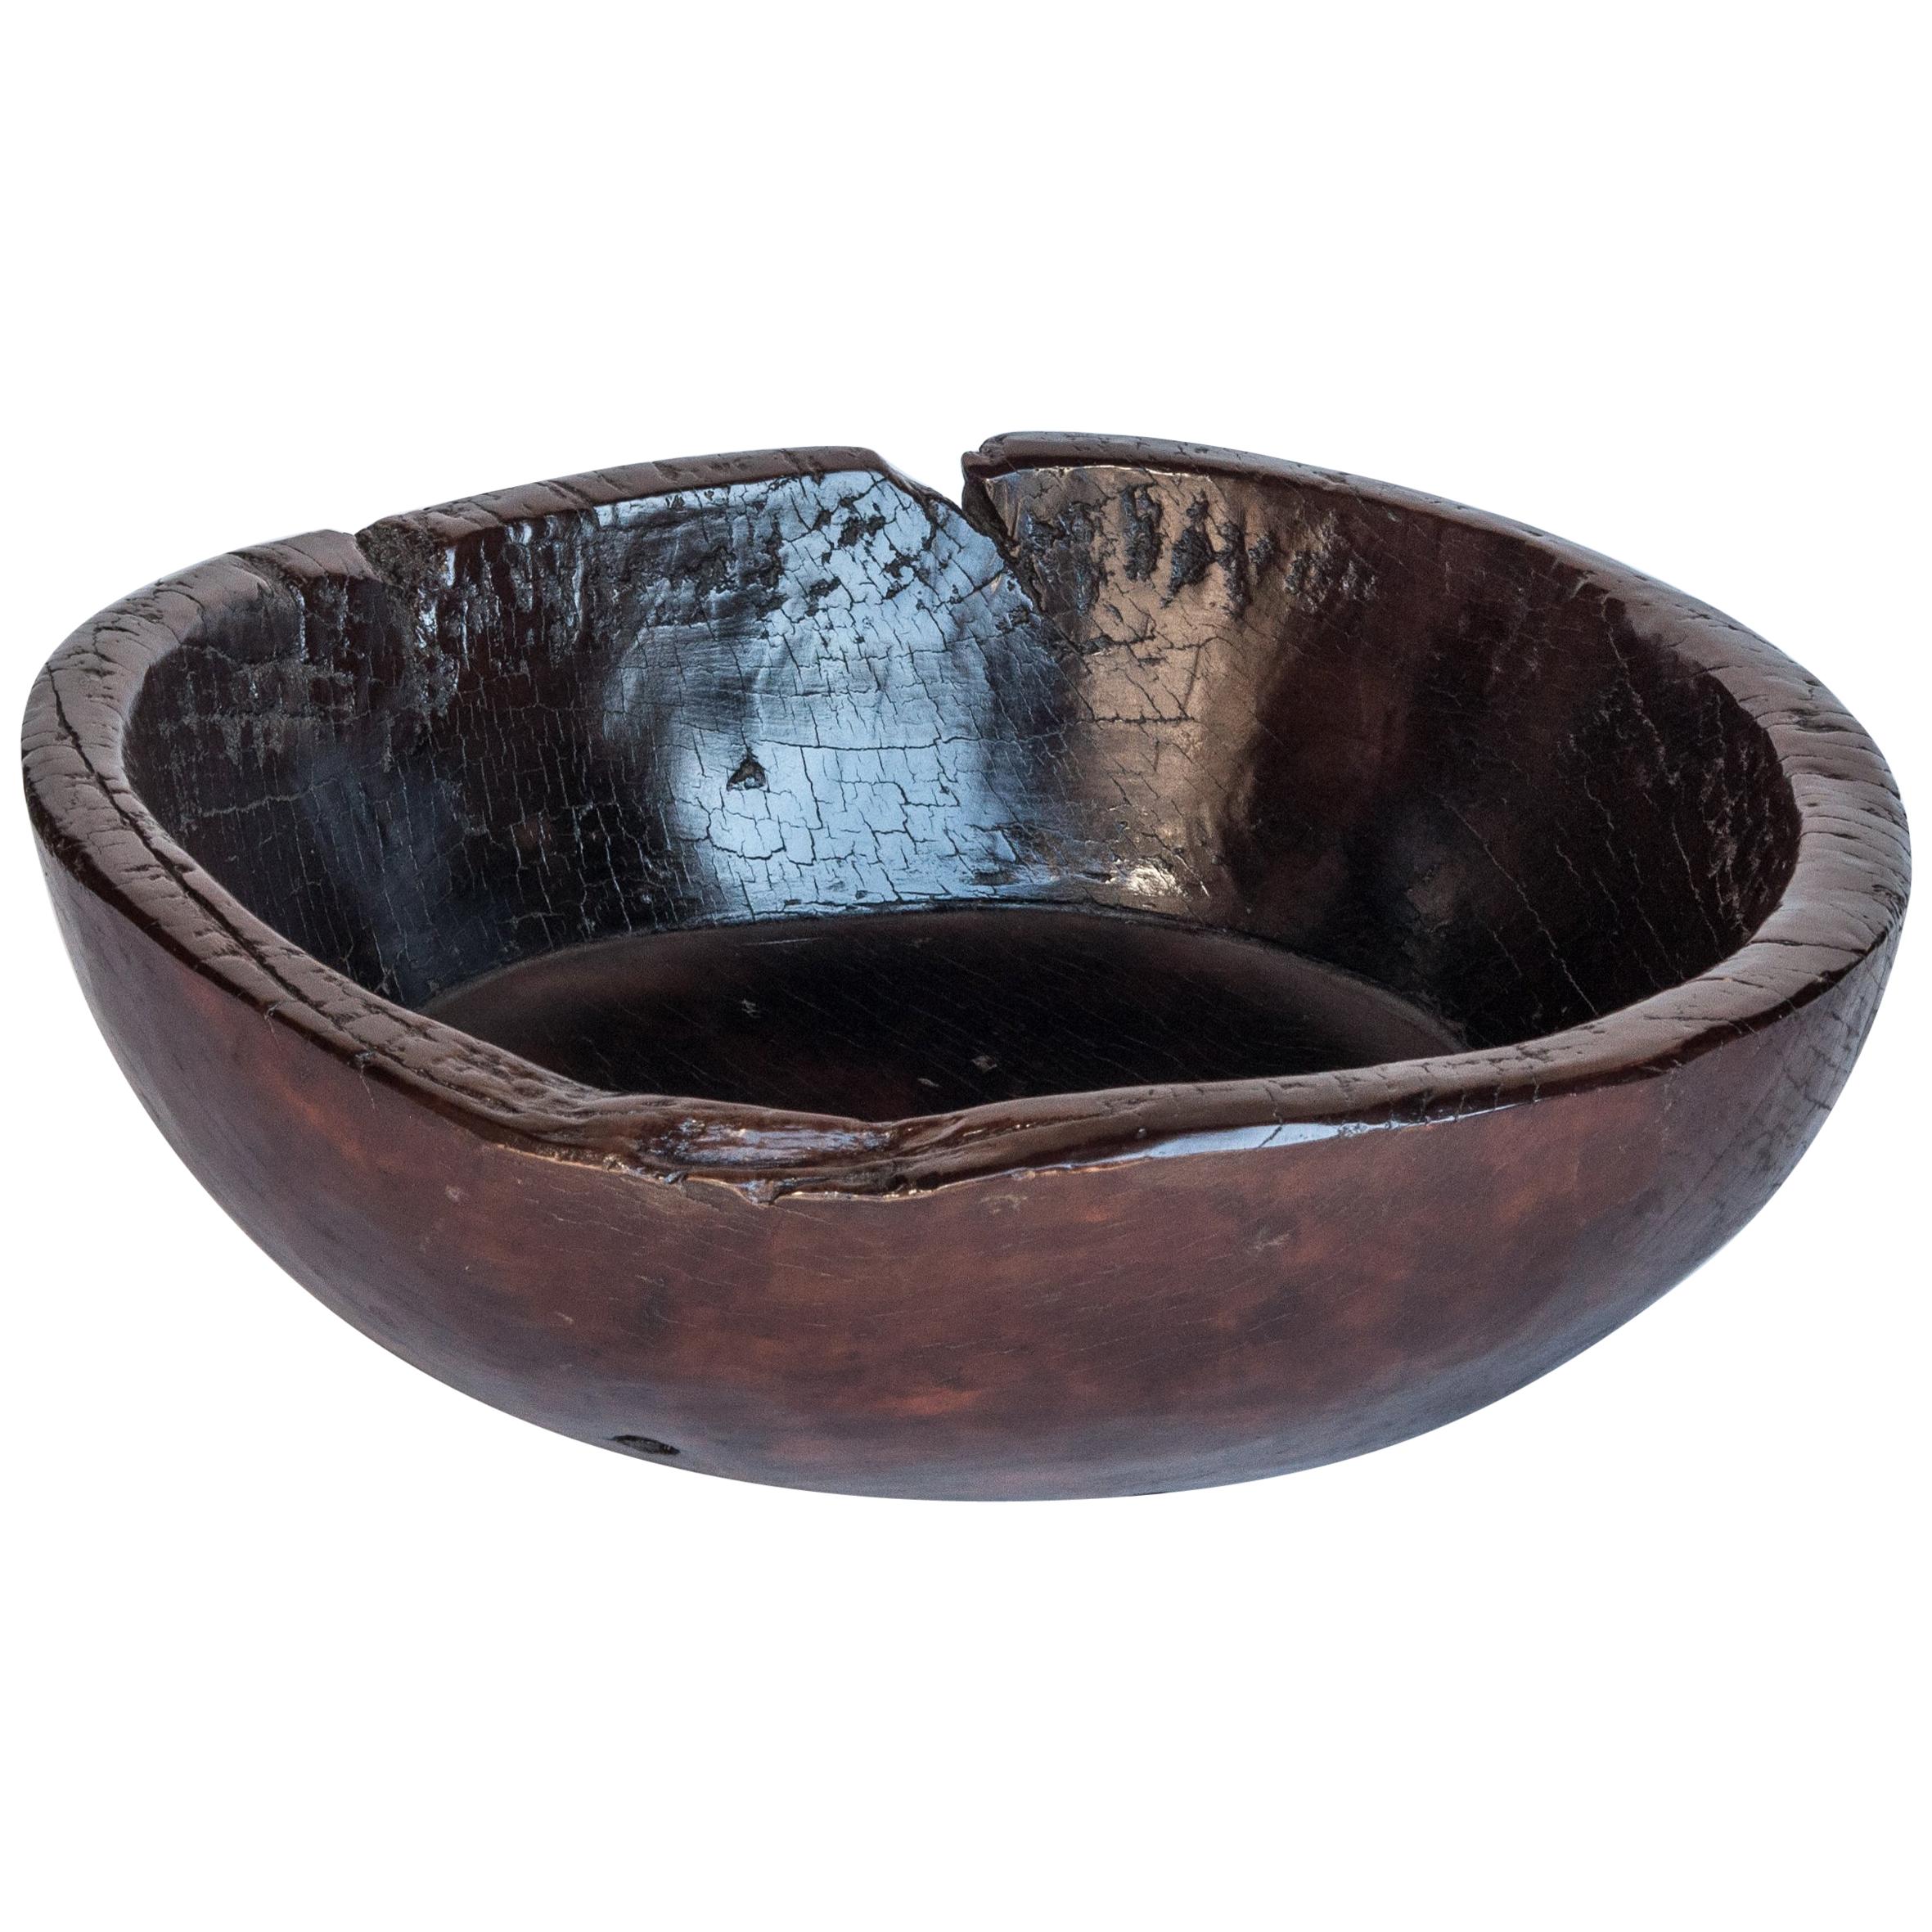 Old Tribal Wooden Bowl from the Nepal Himal, Mid-20th Century